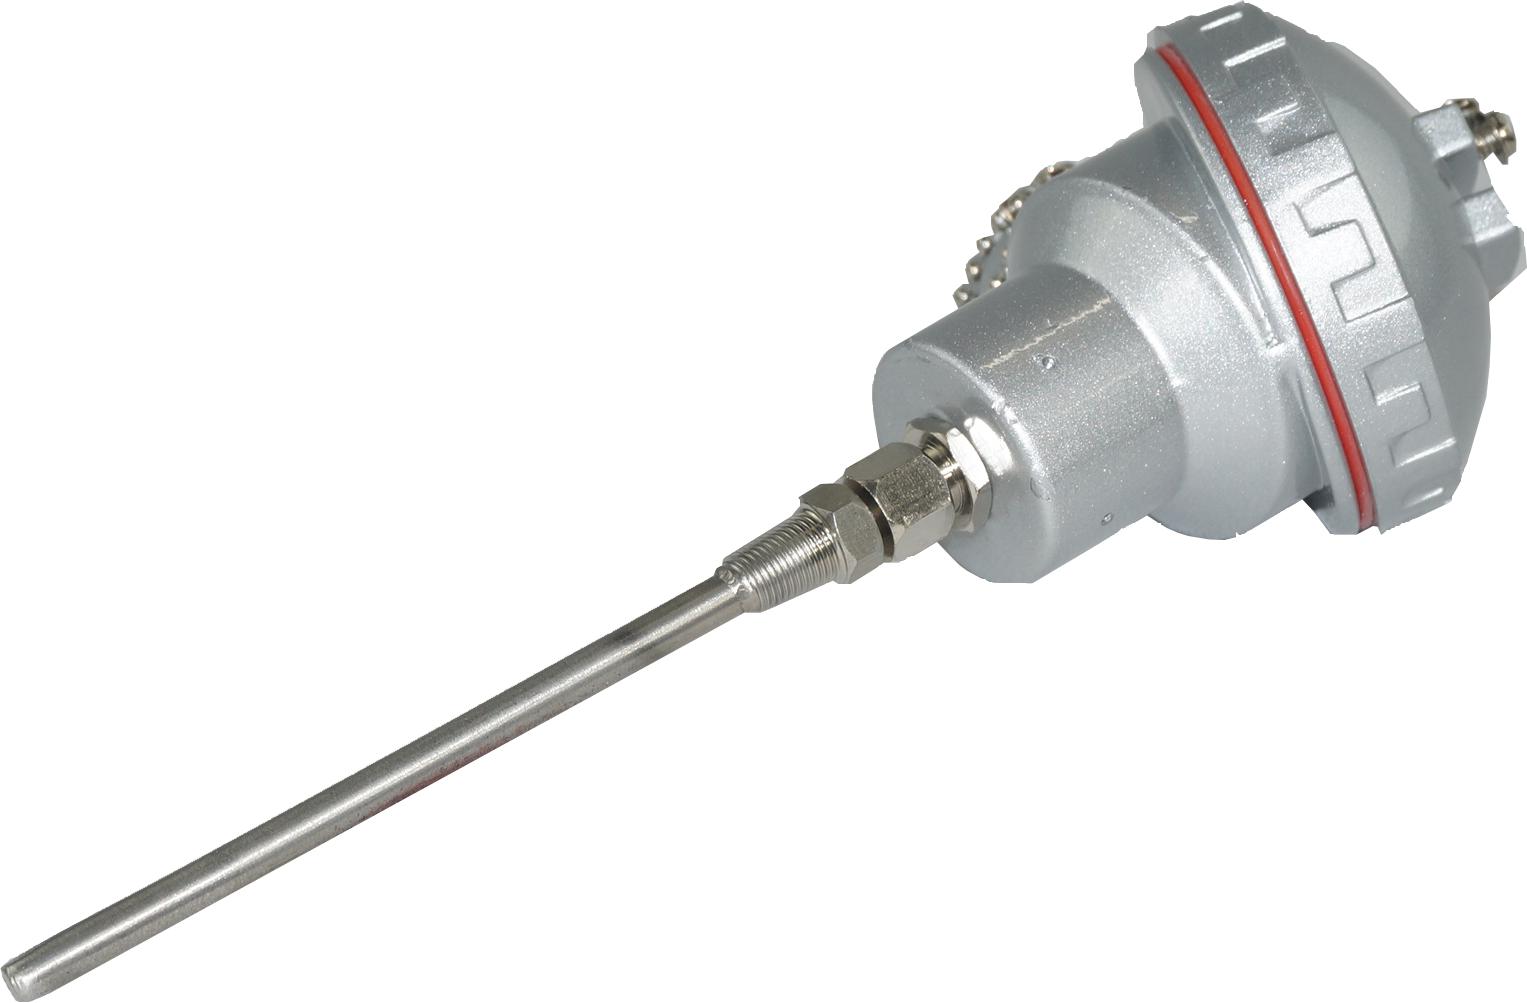 FTCK-D-6-600-XX-KNE, Duplex Type K Thermocouple MIMS Class A, 100 x 6mm Probe w/ Large Terminal Head, -20 to 1000 Deg C, CE ANSI ROHS Approved-Temperature Sensor-Fastron Electronics-Fastron Electronics Store